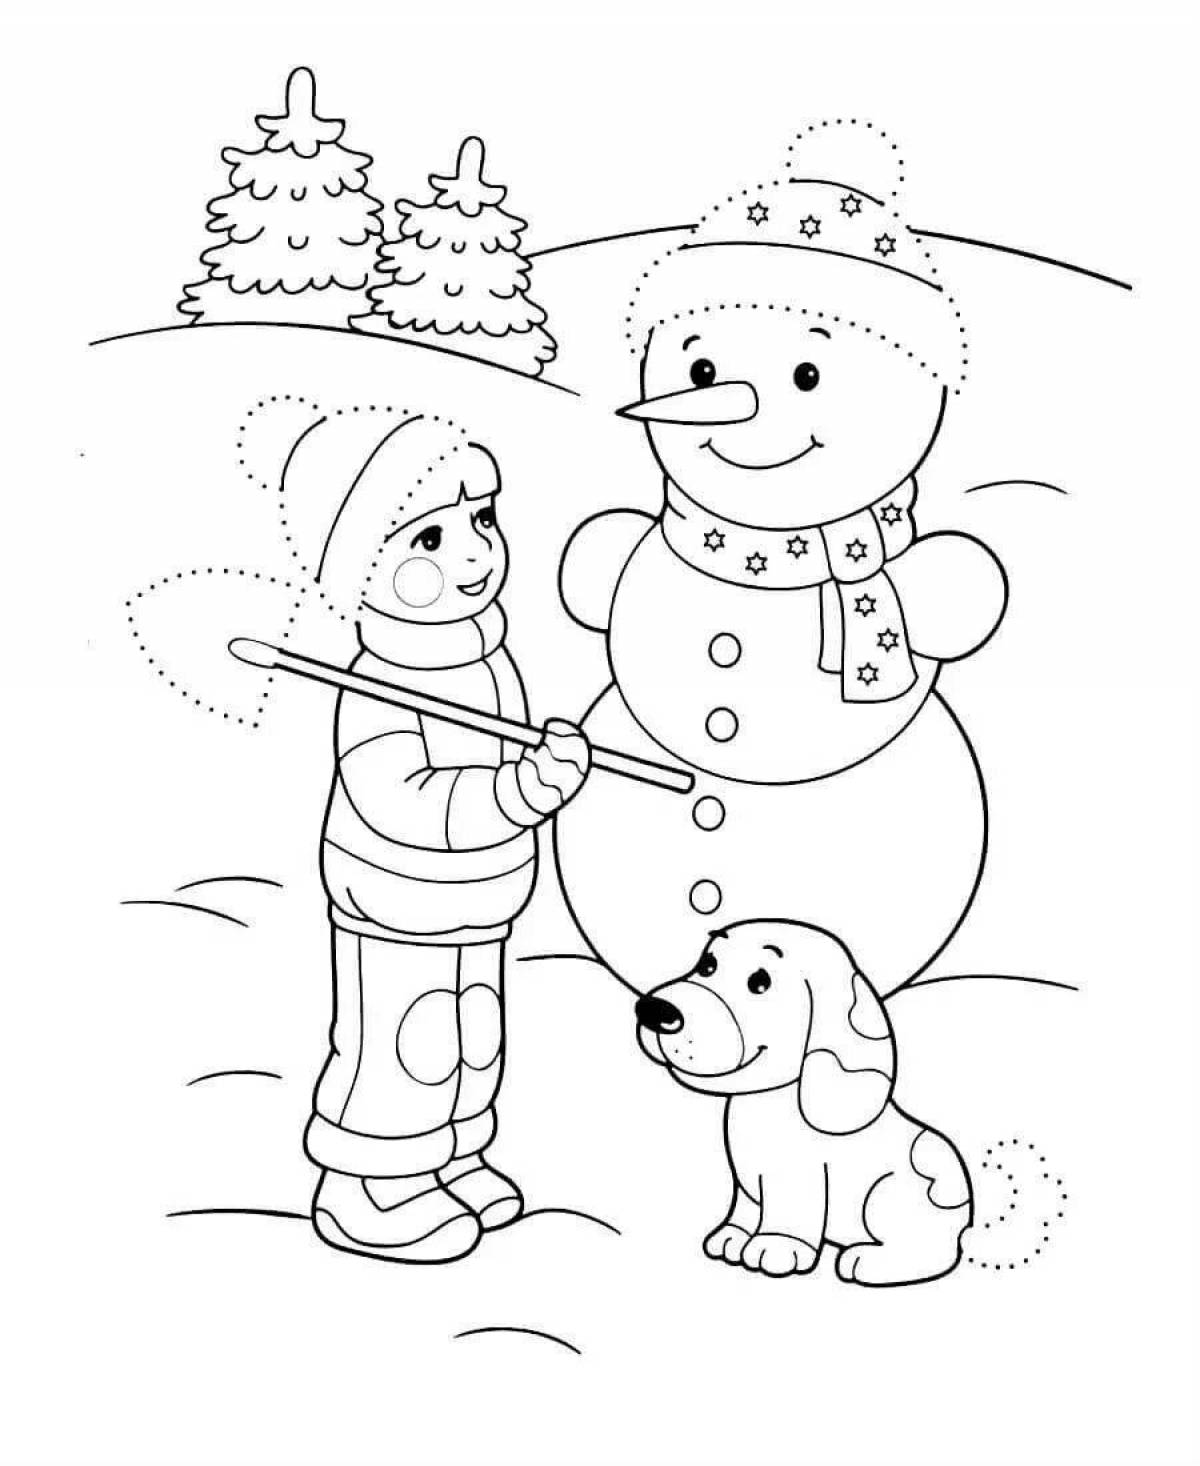 Playful coloring book winter fun for 6 year olds